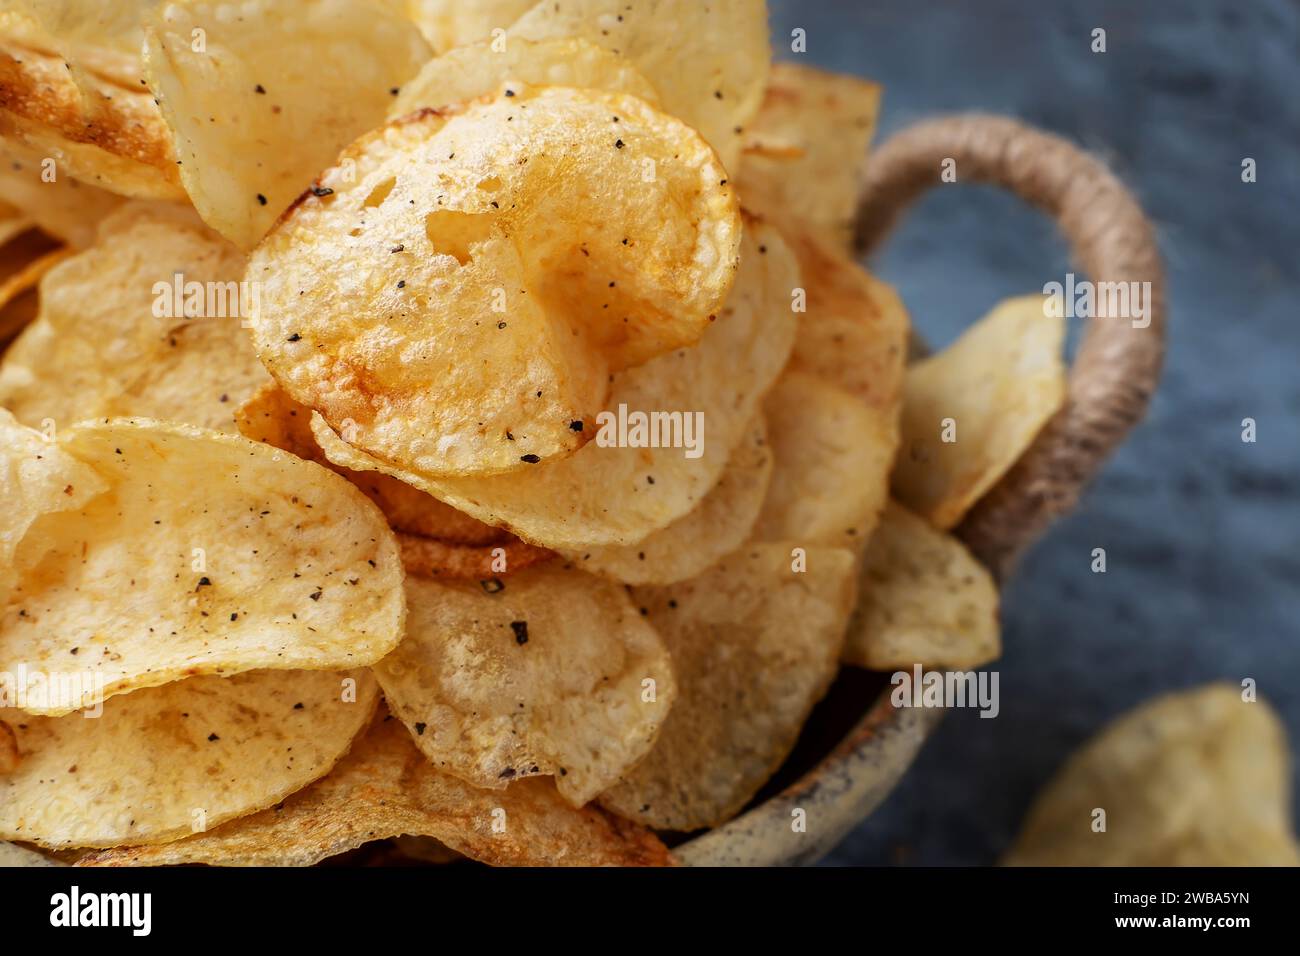 Savory chips in a handmade kraft bowl on a gray background. Potato chips with spices and peppers of different kinds. Close-up. Stock Photo